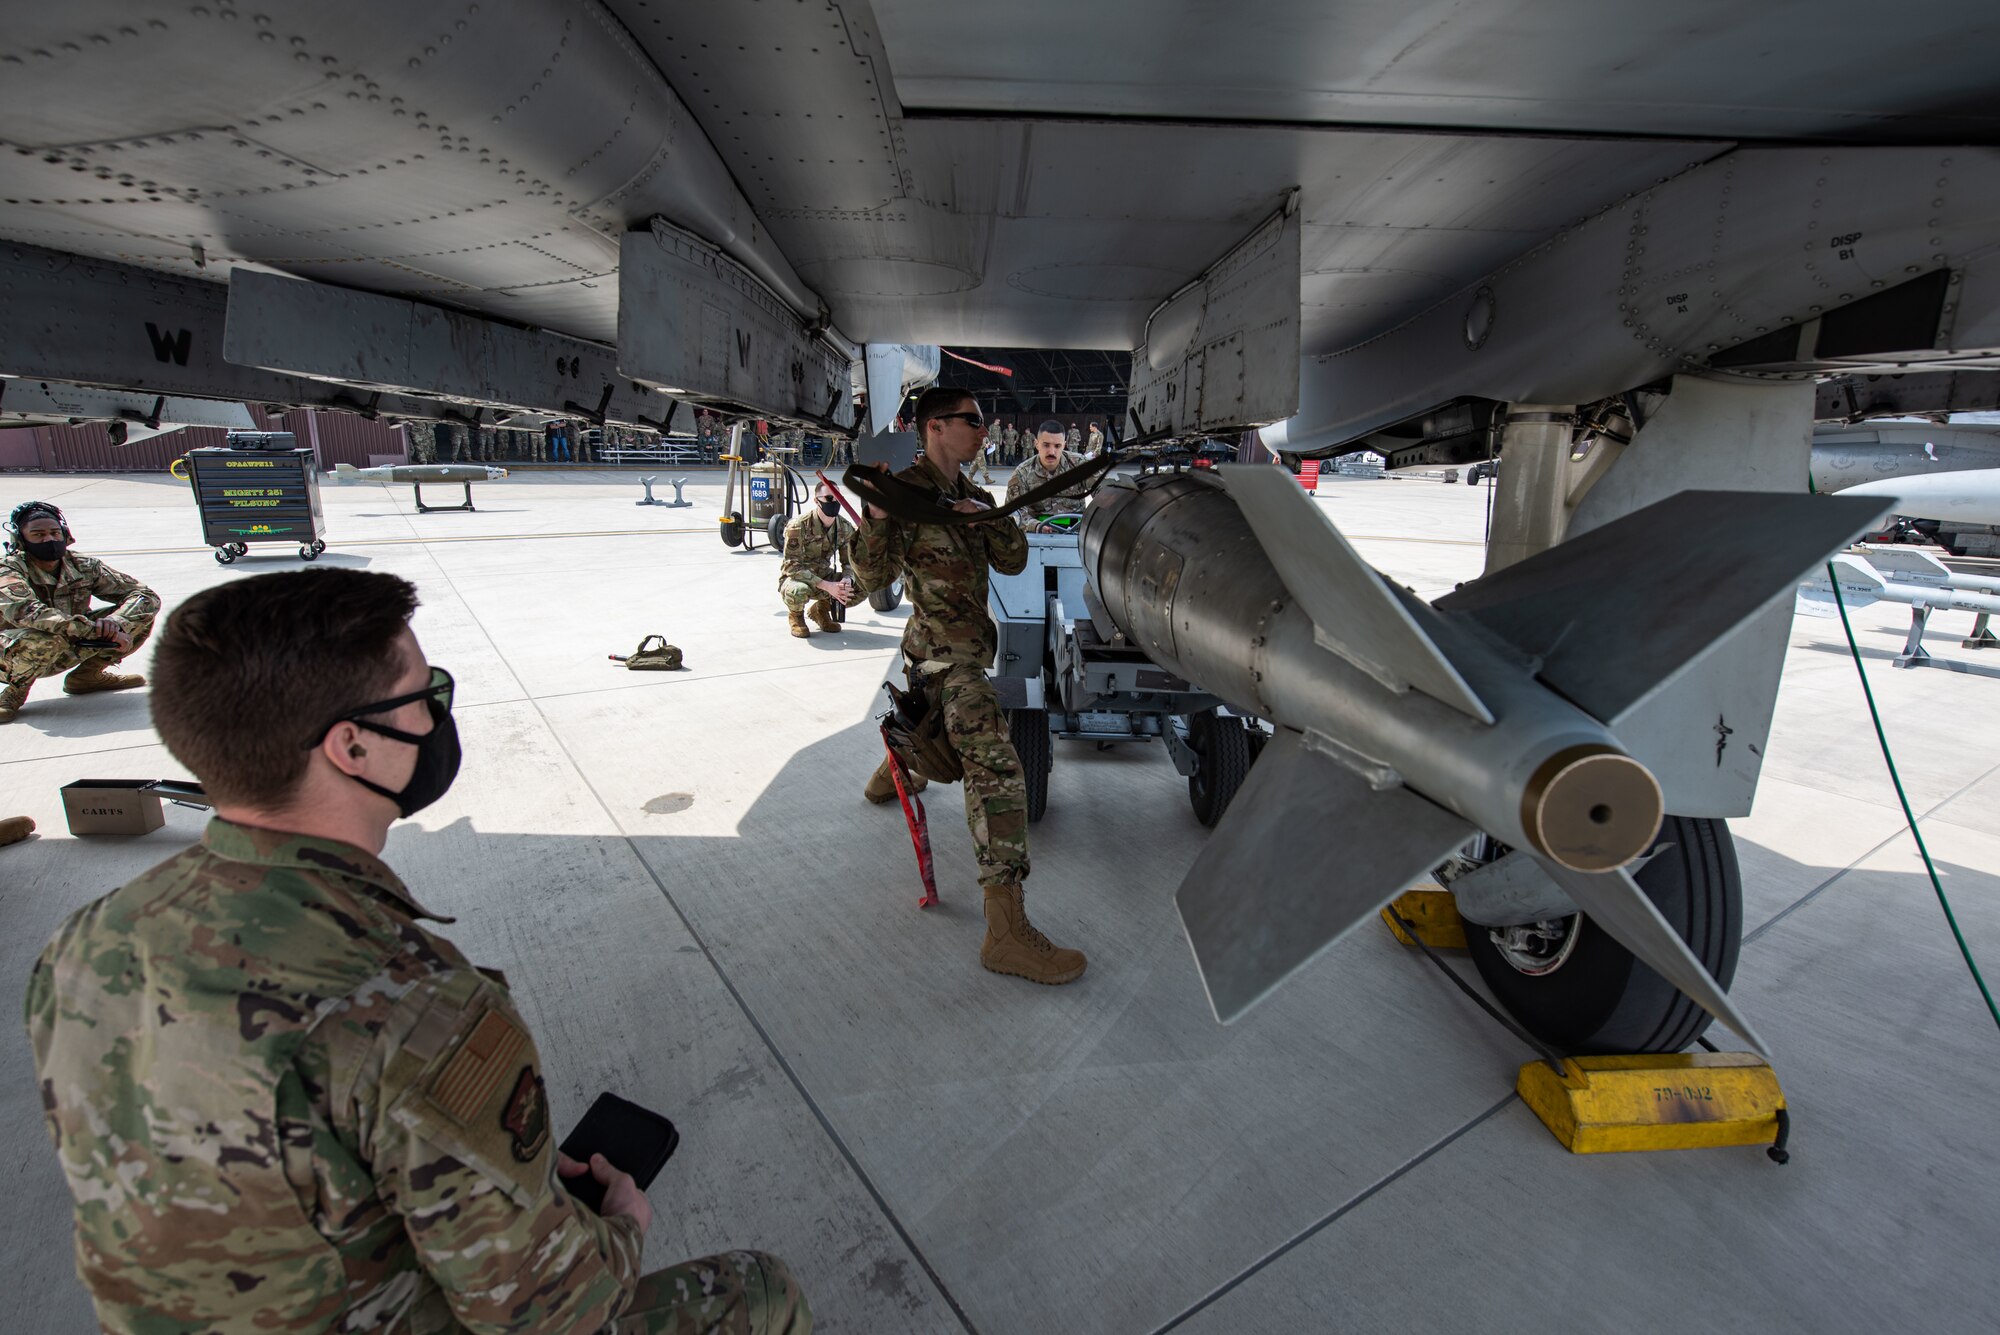 Members with the 25th Aircraft Maintenance Unit load munitions onto an A-10 Warthog during the 51st Maintenance Group Weapons Load Crew Competition at Osan Air Base, Republic of Korea, April 6, 2022.